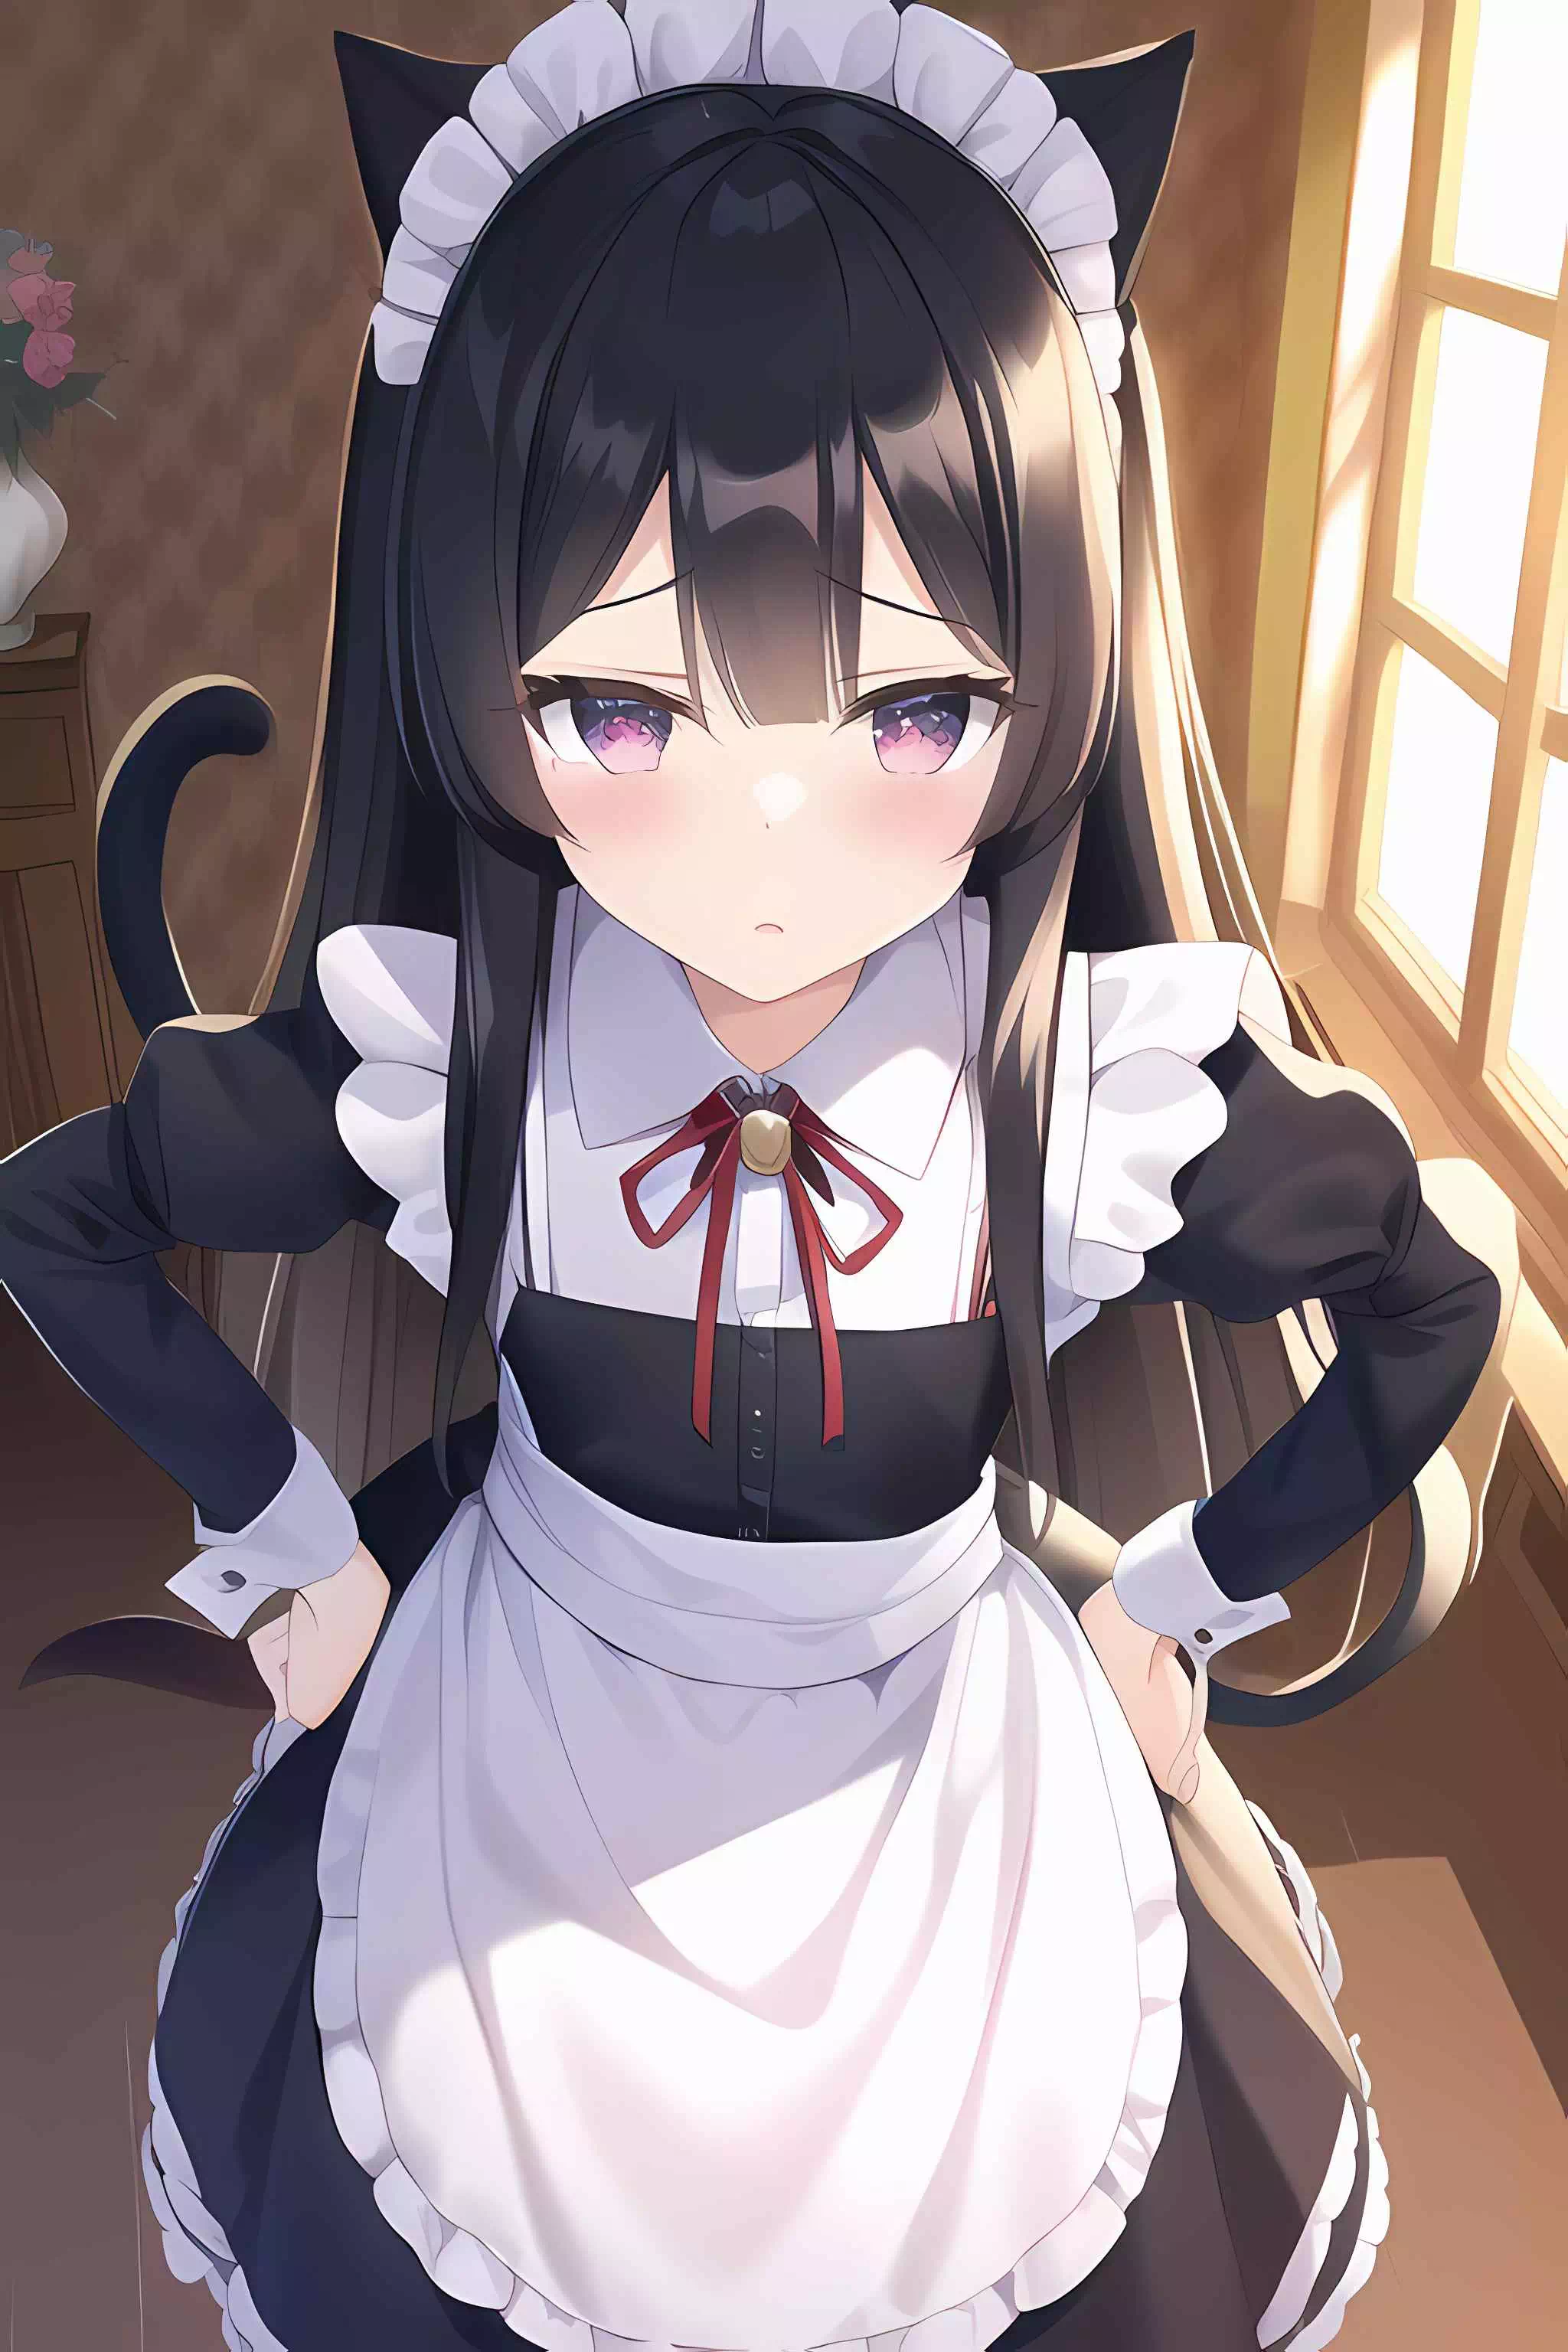 Neko Mimi Maid is disappointed